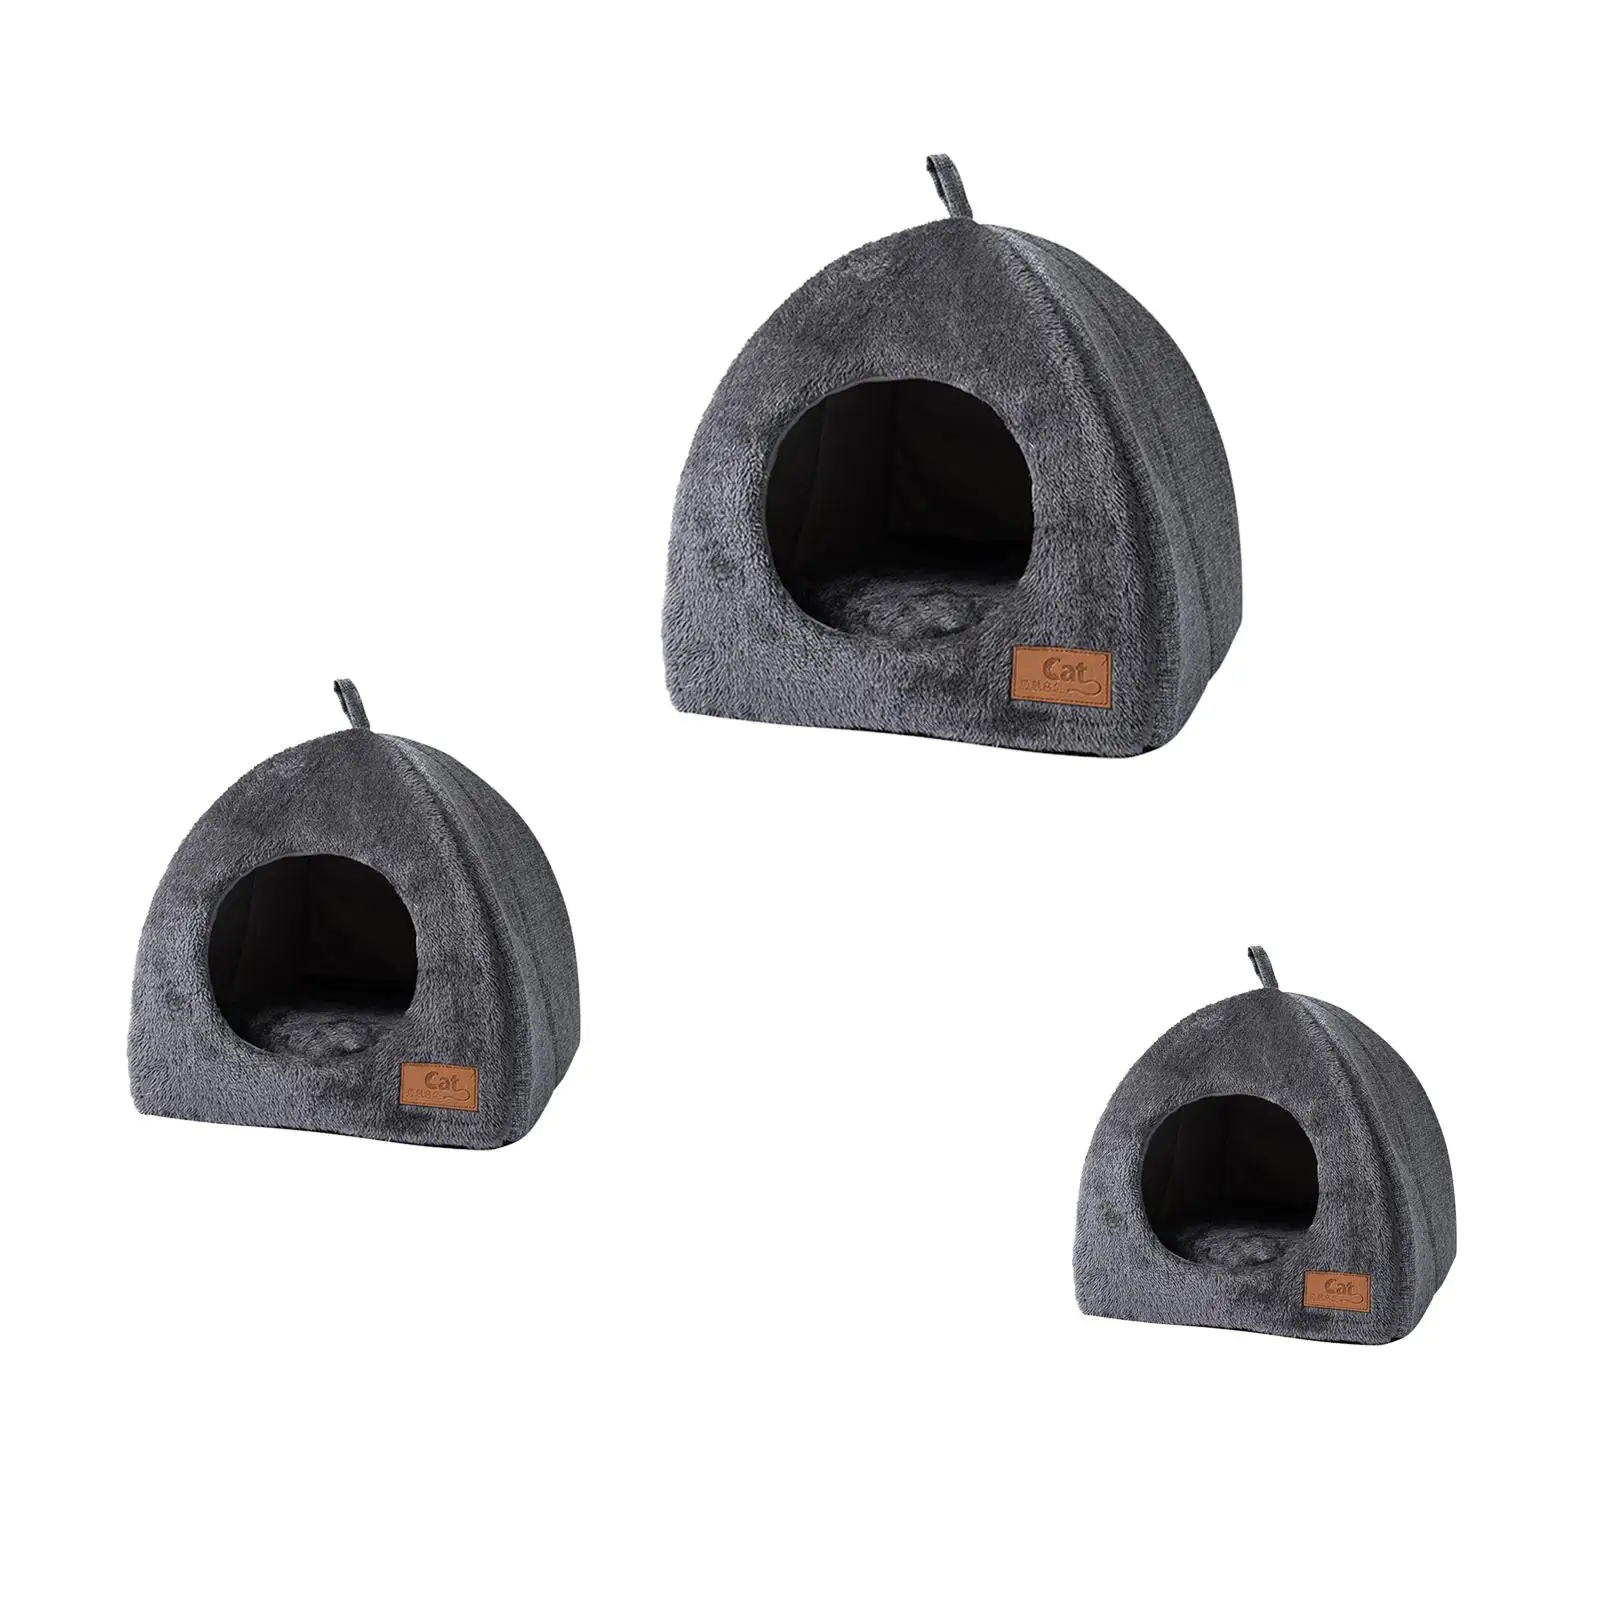 Pad Nest Sleeping Bed Cushion Soft Basket Warm Puppy Puppy Mat Kennel Pad for Cats Pet Indoor Cats Kitten Rabbits Puppy